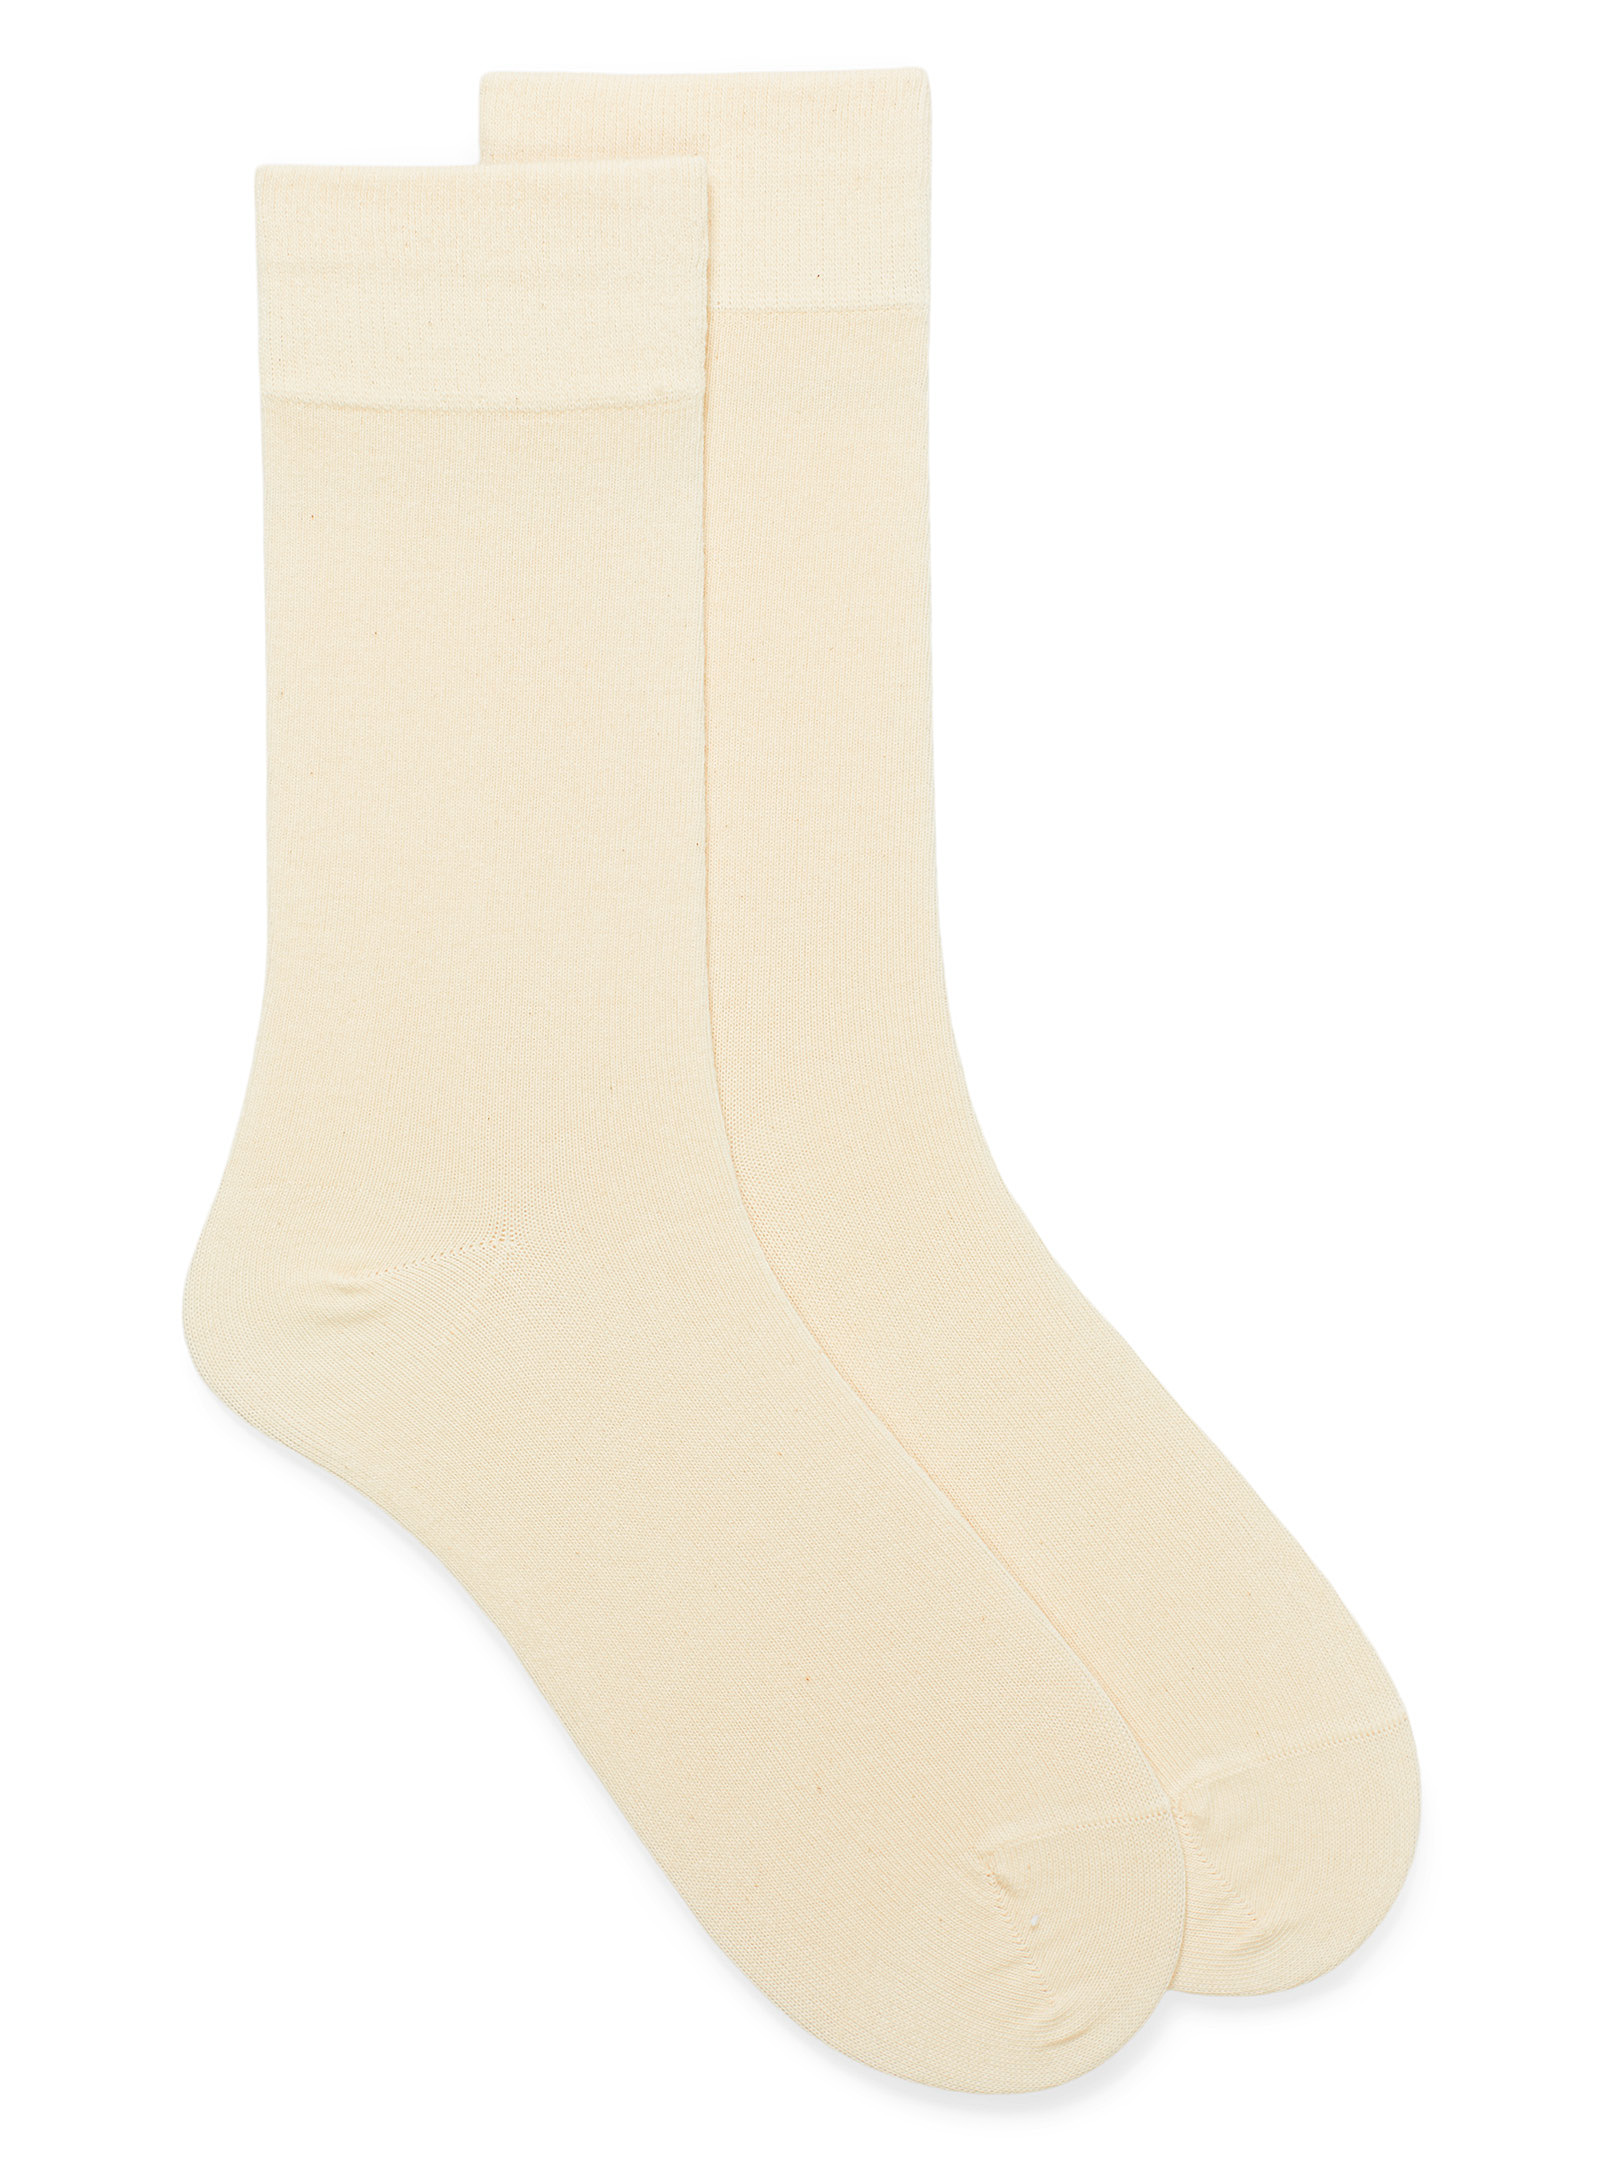 Le 31 Essential Organic Cotton Socks In Ivory White